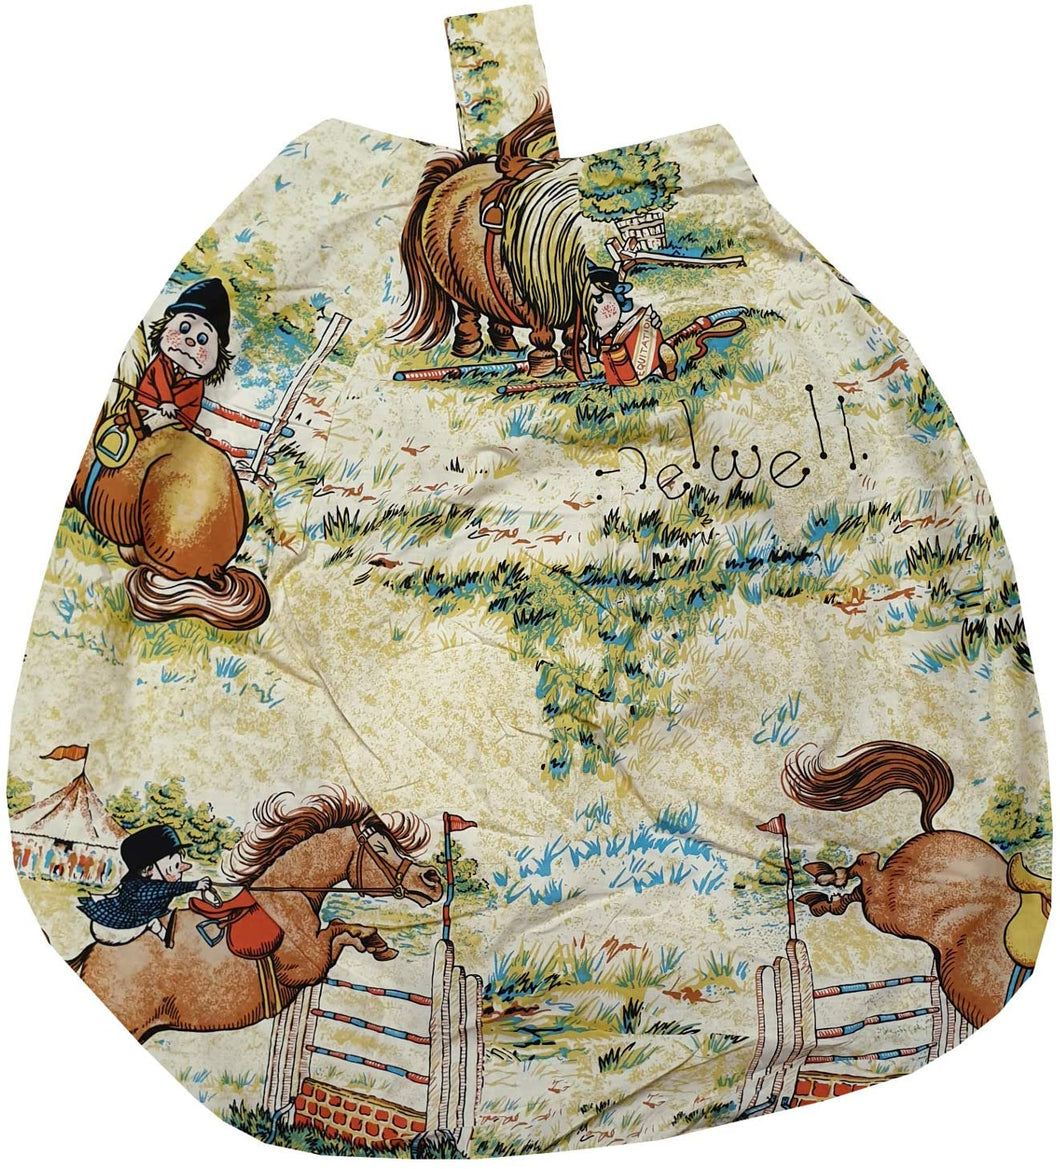 Thelwell Trophy Horses Cartoon Jumping Vintage Filled Bean Bag